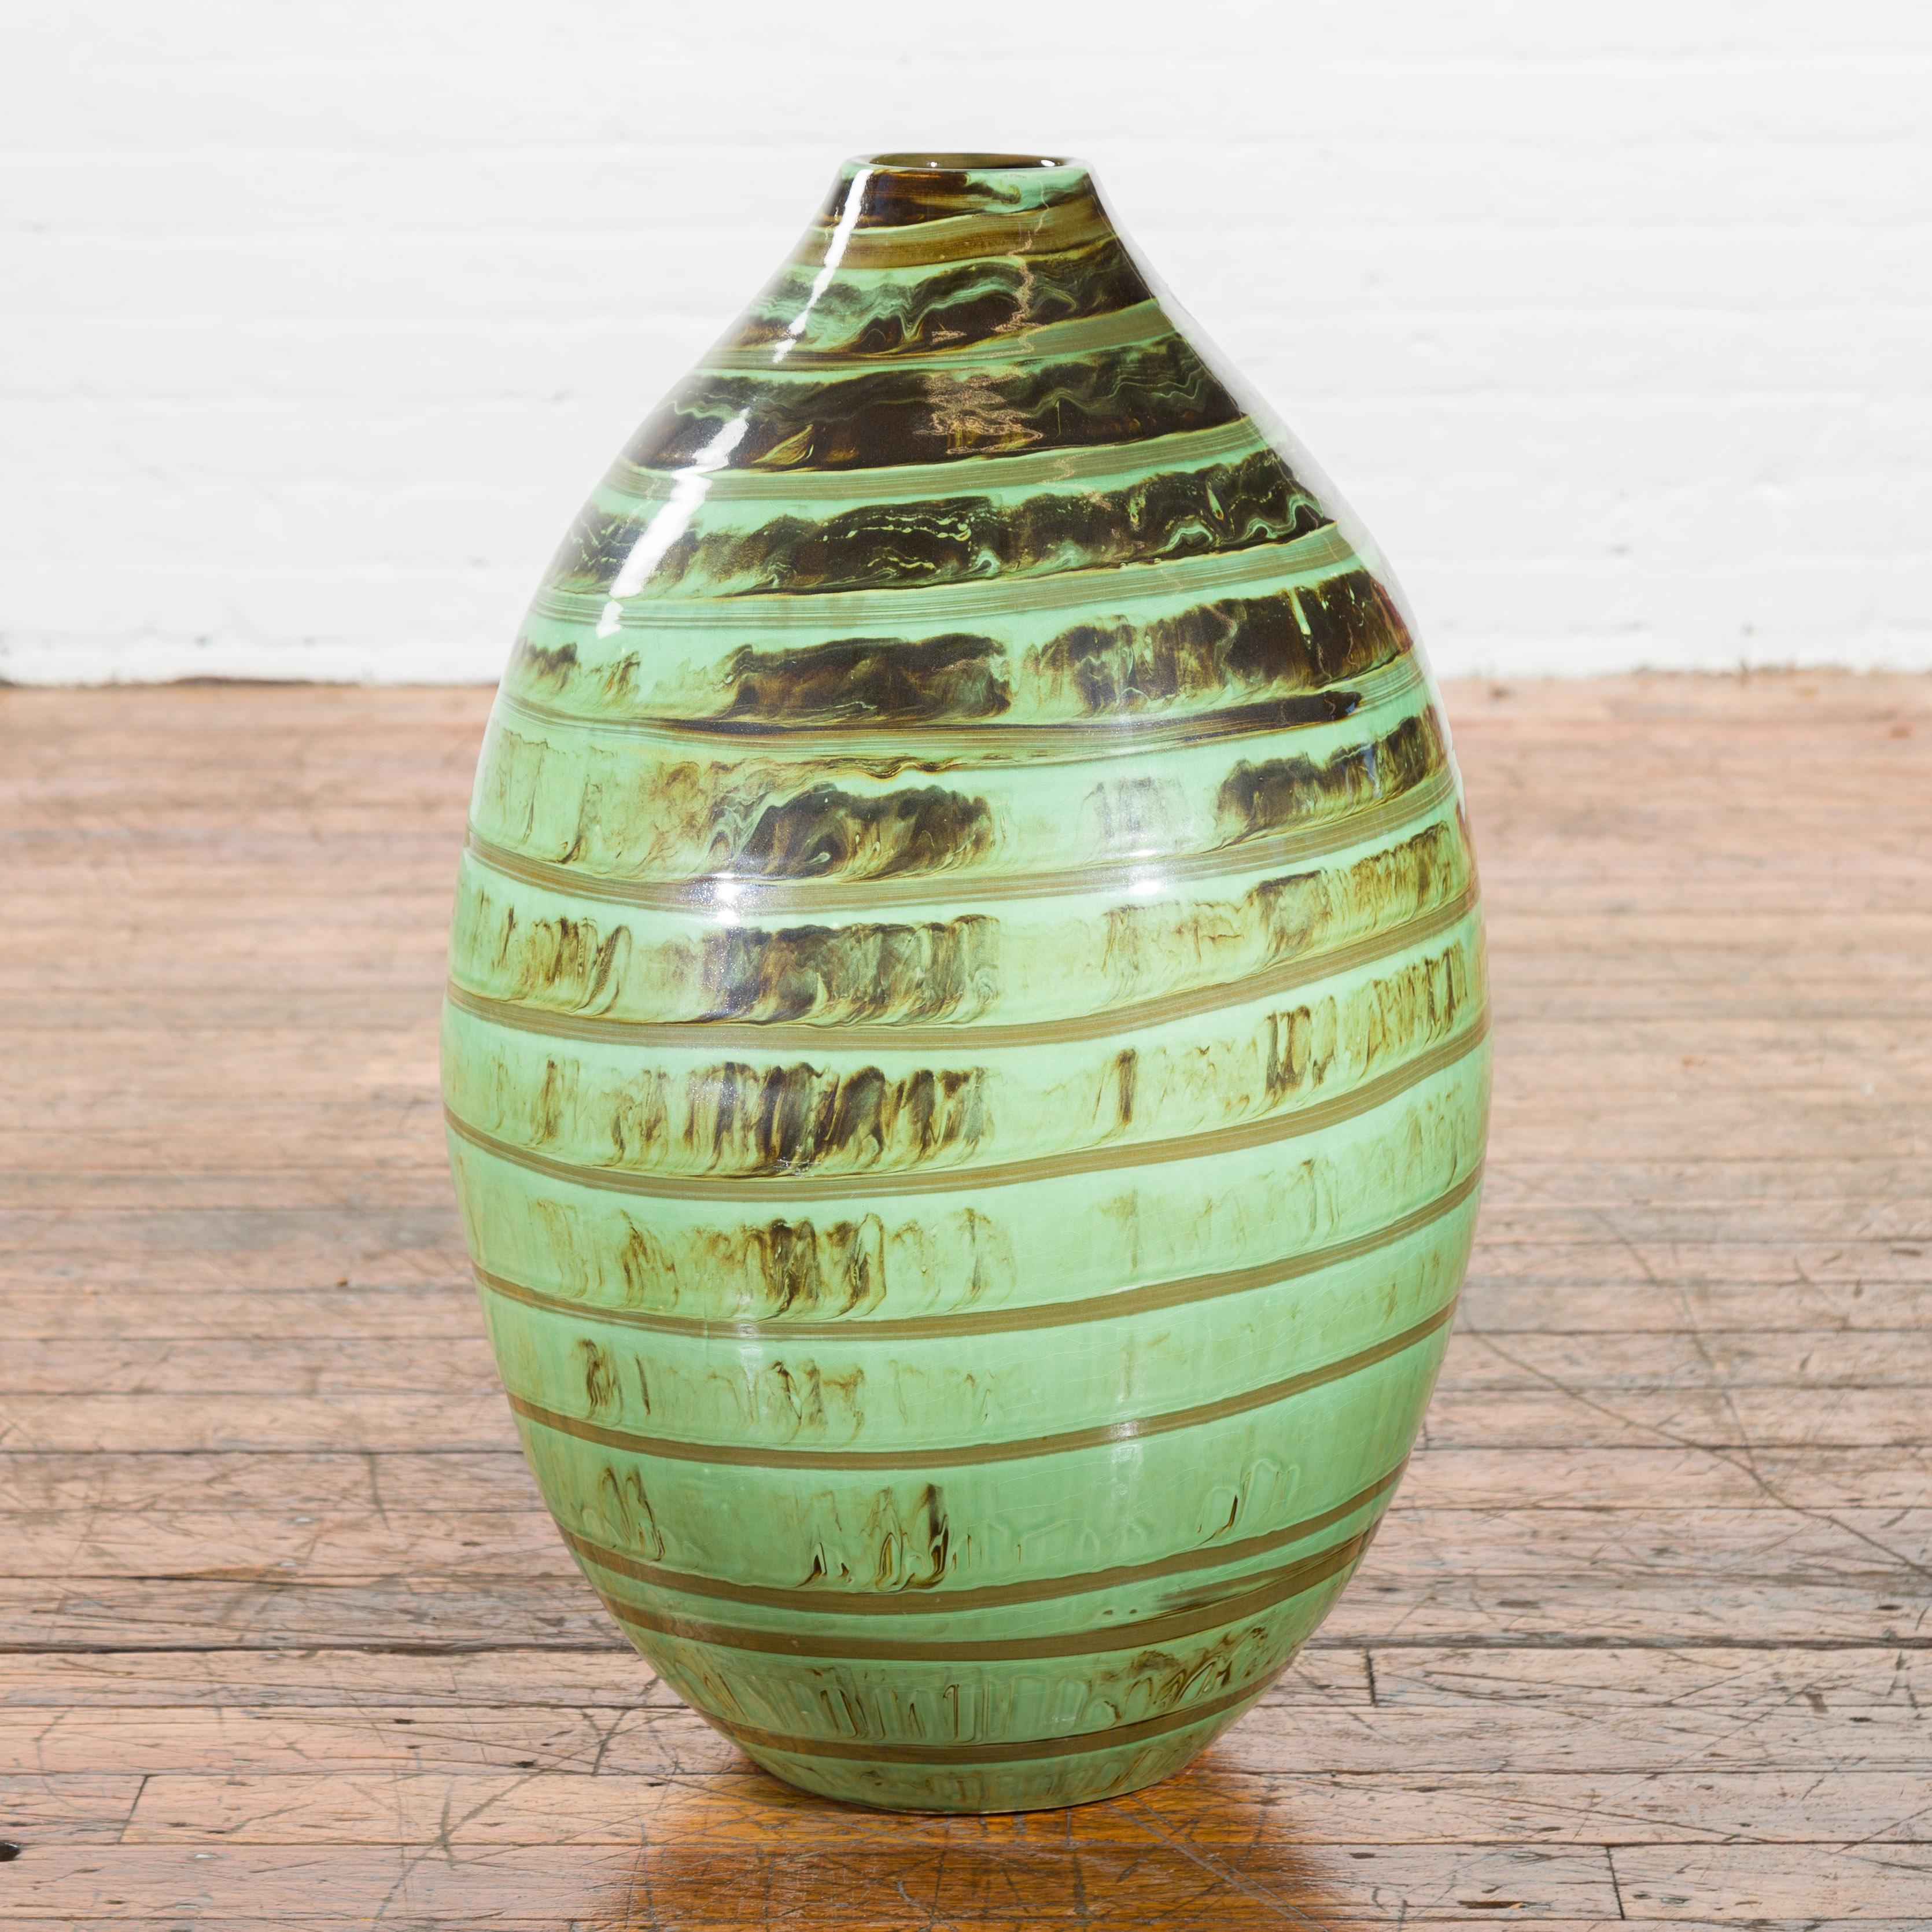 Artisan Contemporary Green and Brown Glaze Ceramic Vase with Spiral Decor In Good Condition For Sale In Yonkers, NY